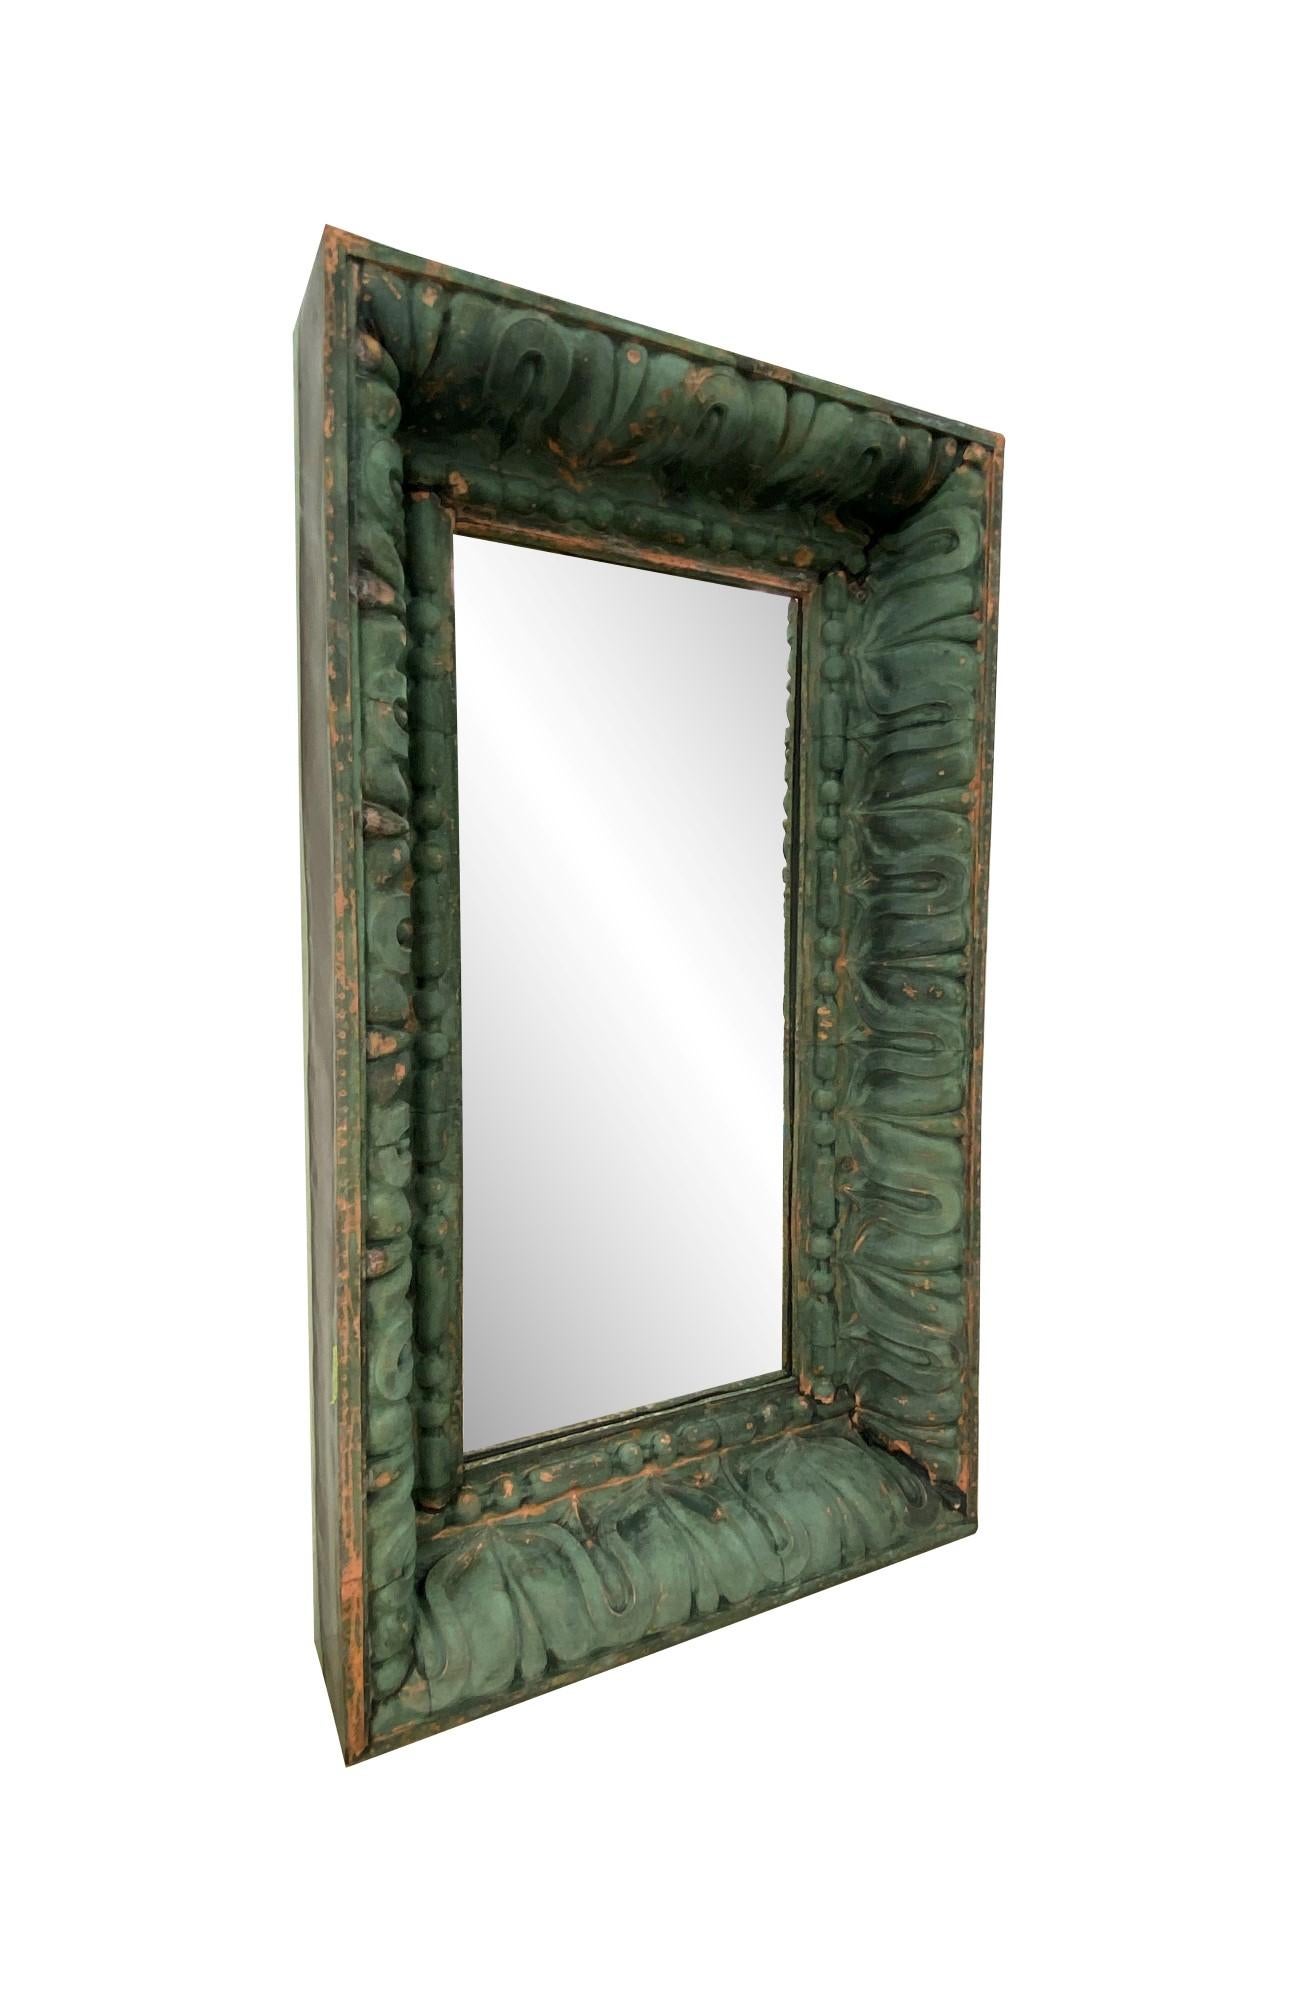 This large scale mirror is made from a turn of the century copper cornice from a NYC building. Features a stylized egg and dart design which dates back to ancient Greece. Original natural weathered verdigris patina. New mirror glass. Full wood